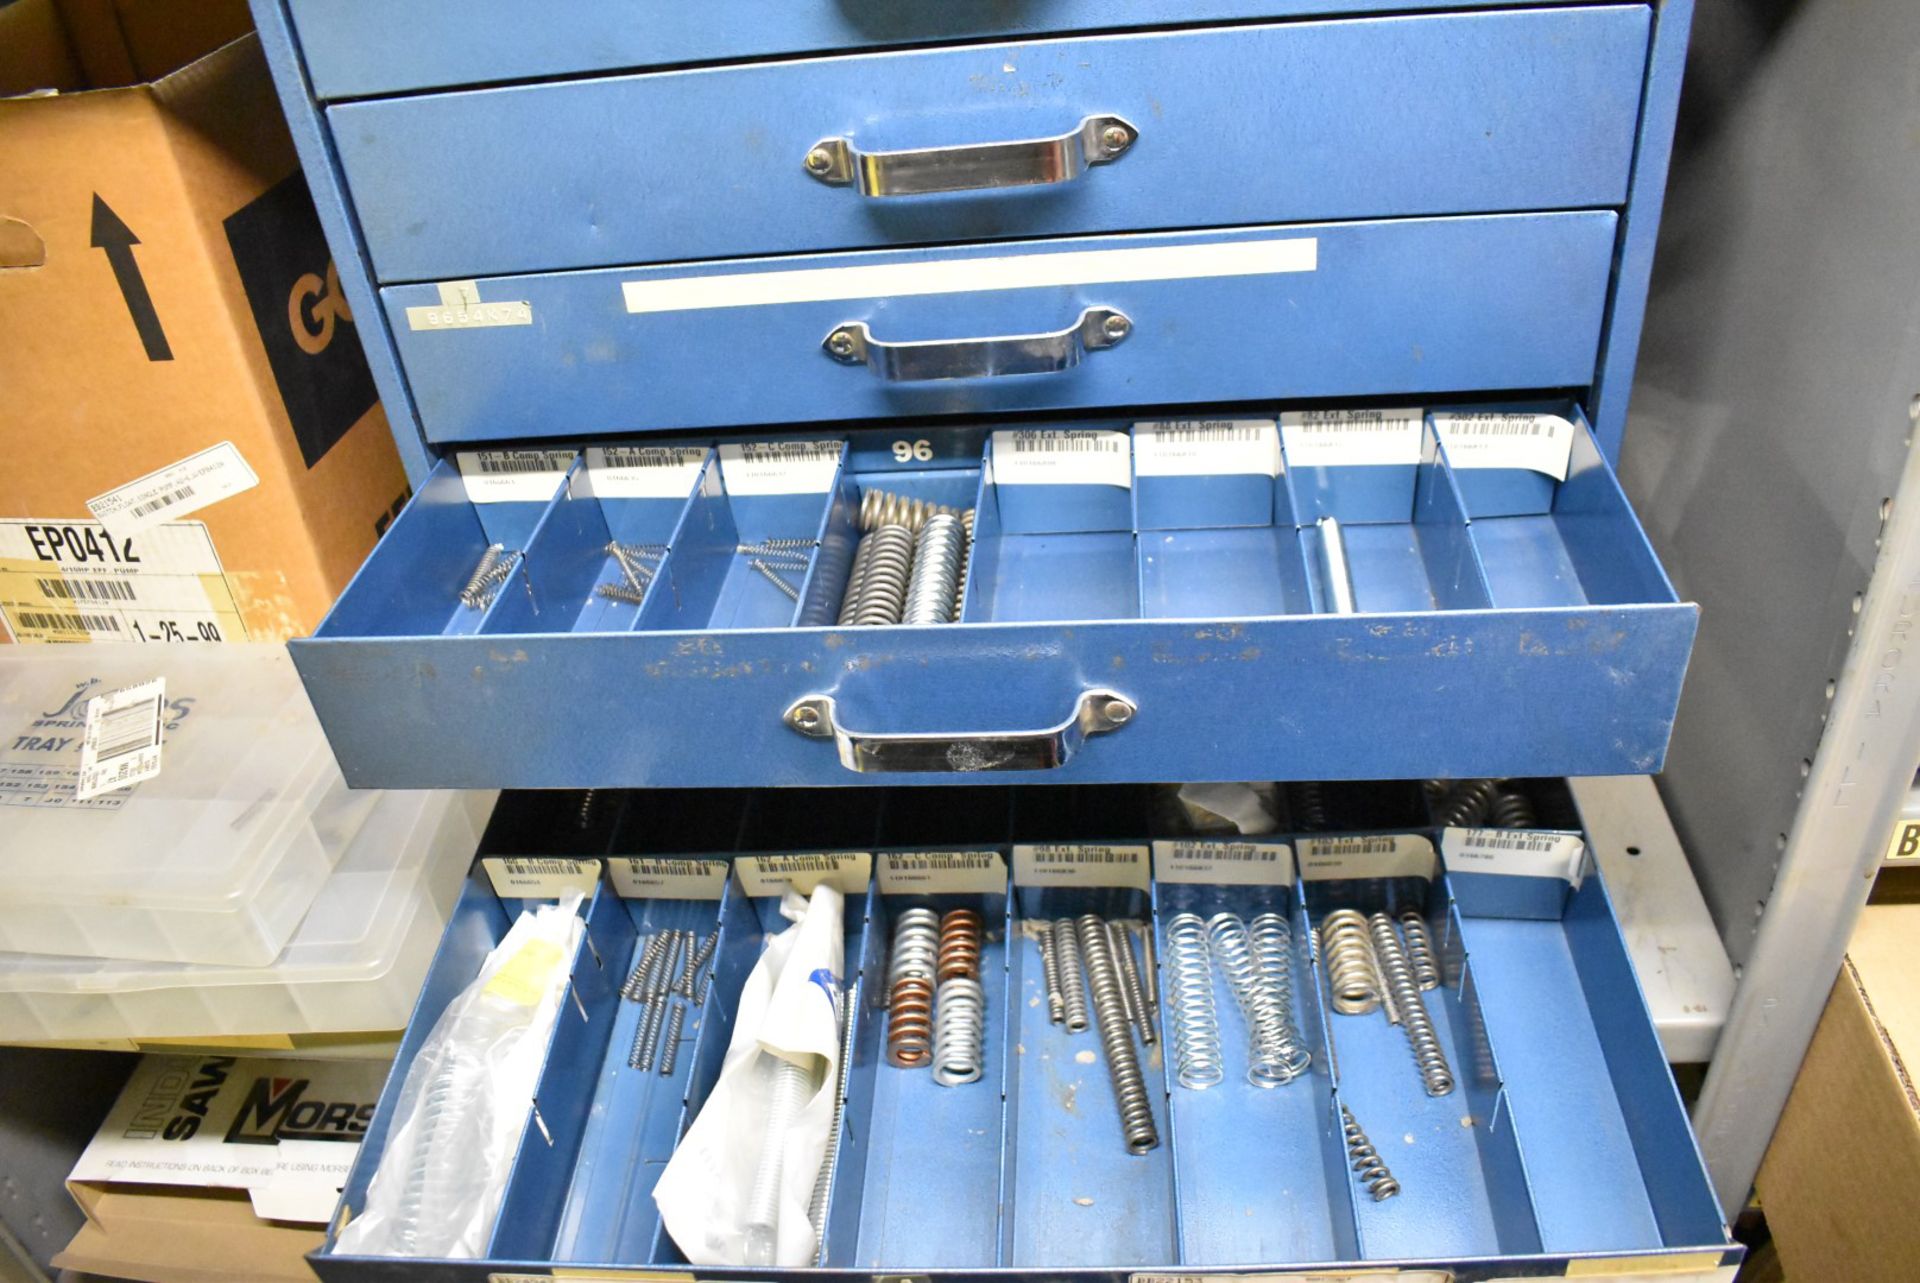 LOT/ CONTENTS OF SHELF - INCLUDING STORAGE BOX WITH SPRINGS, PVC HOSE, BAND SAW BLADES, INVERTER [ - Image 4 of 5